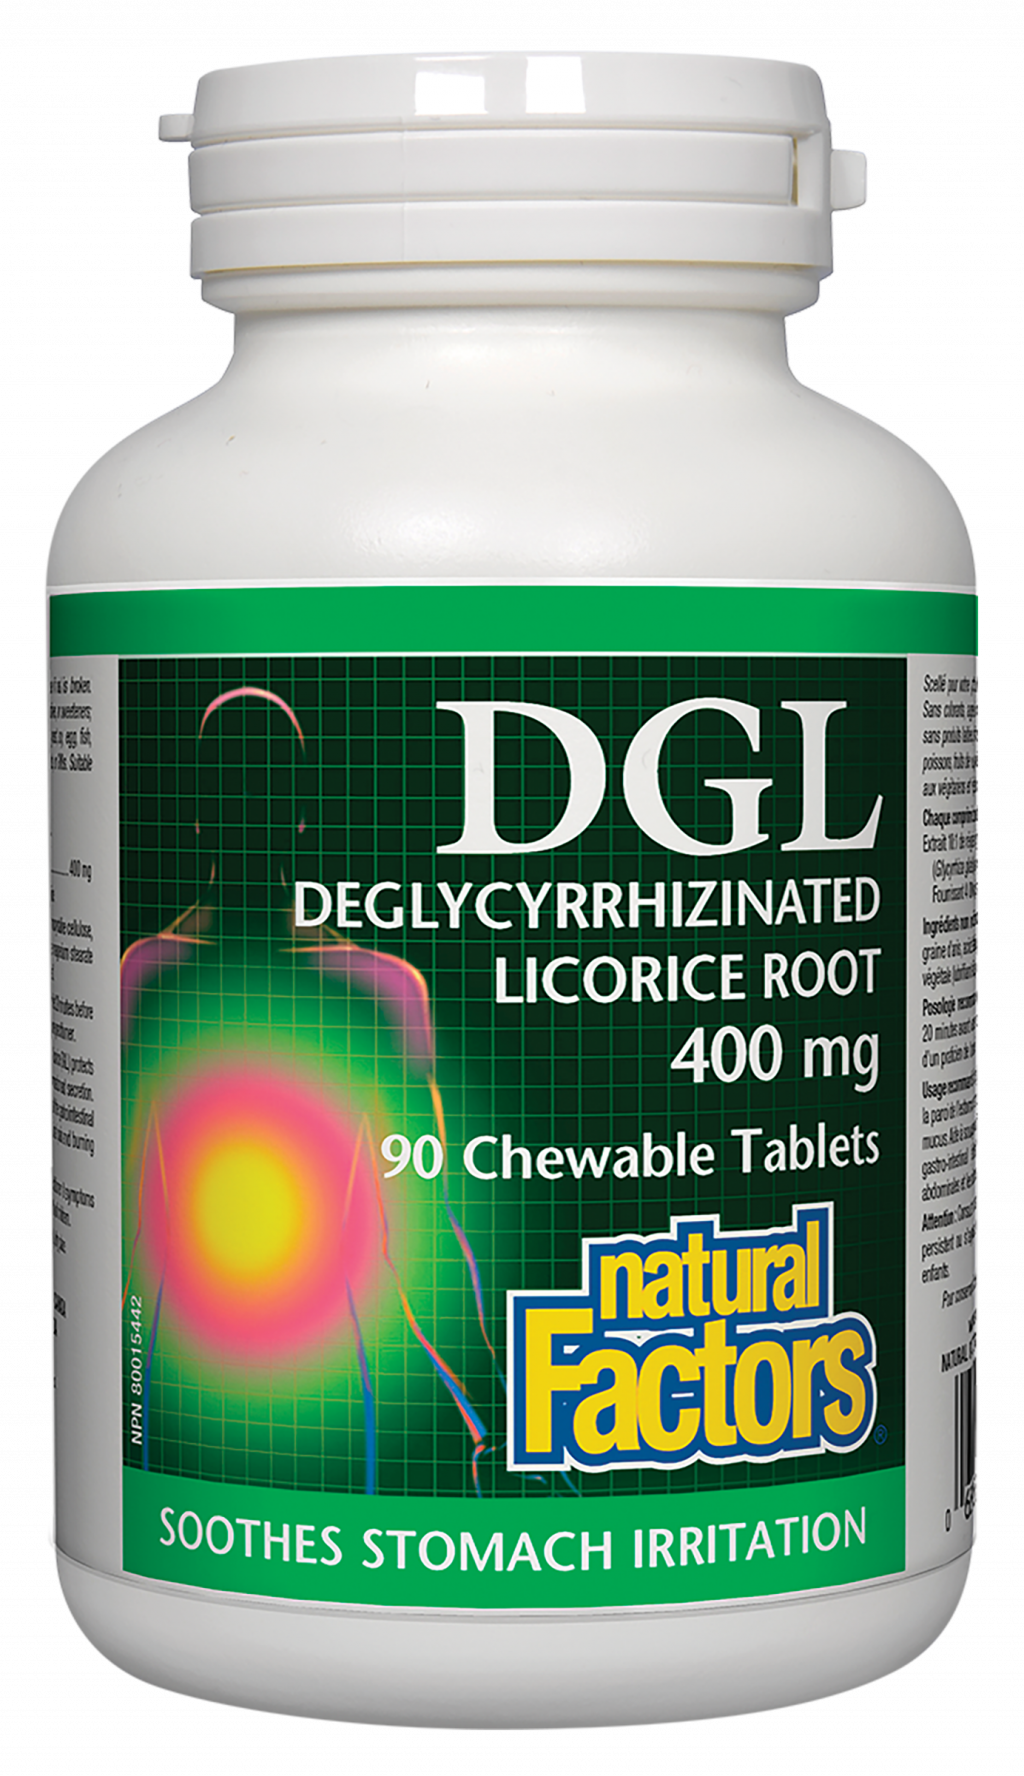 Natural Factors DGL  Deglycyrrhizinated Licorice Root  400 mg  90 Chewable Tablets